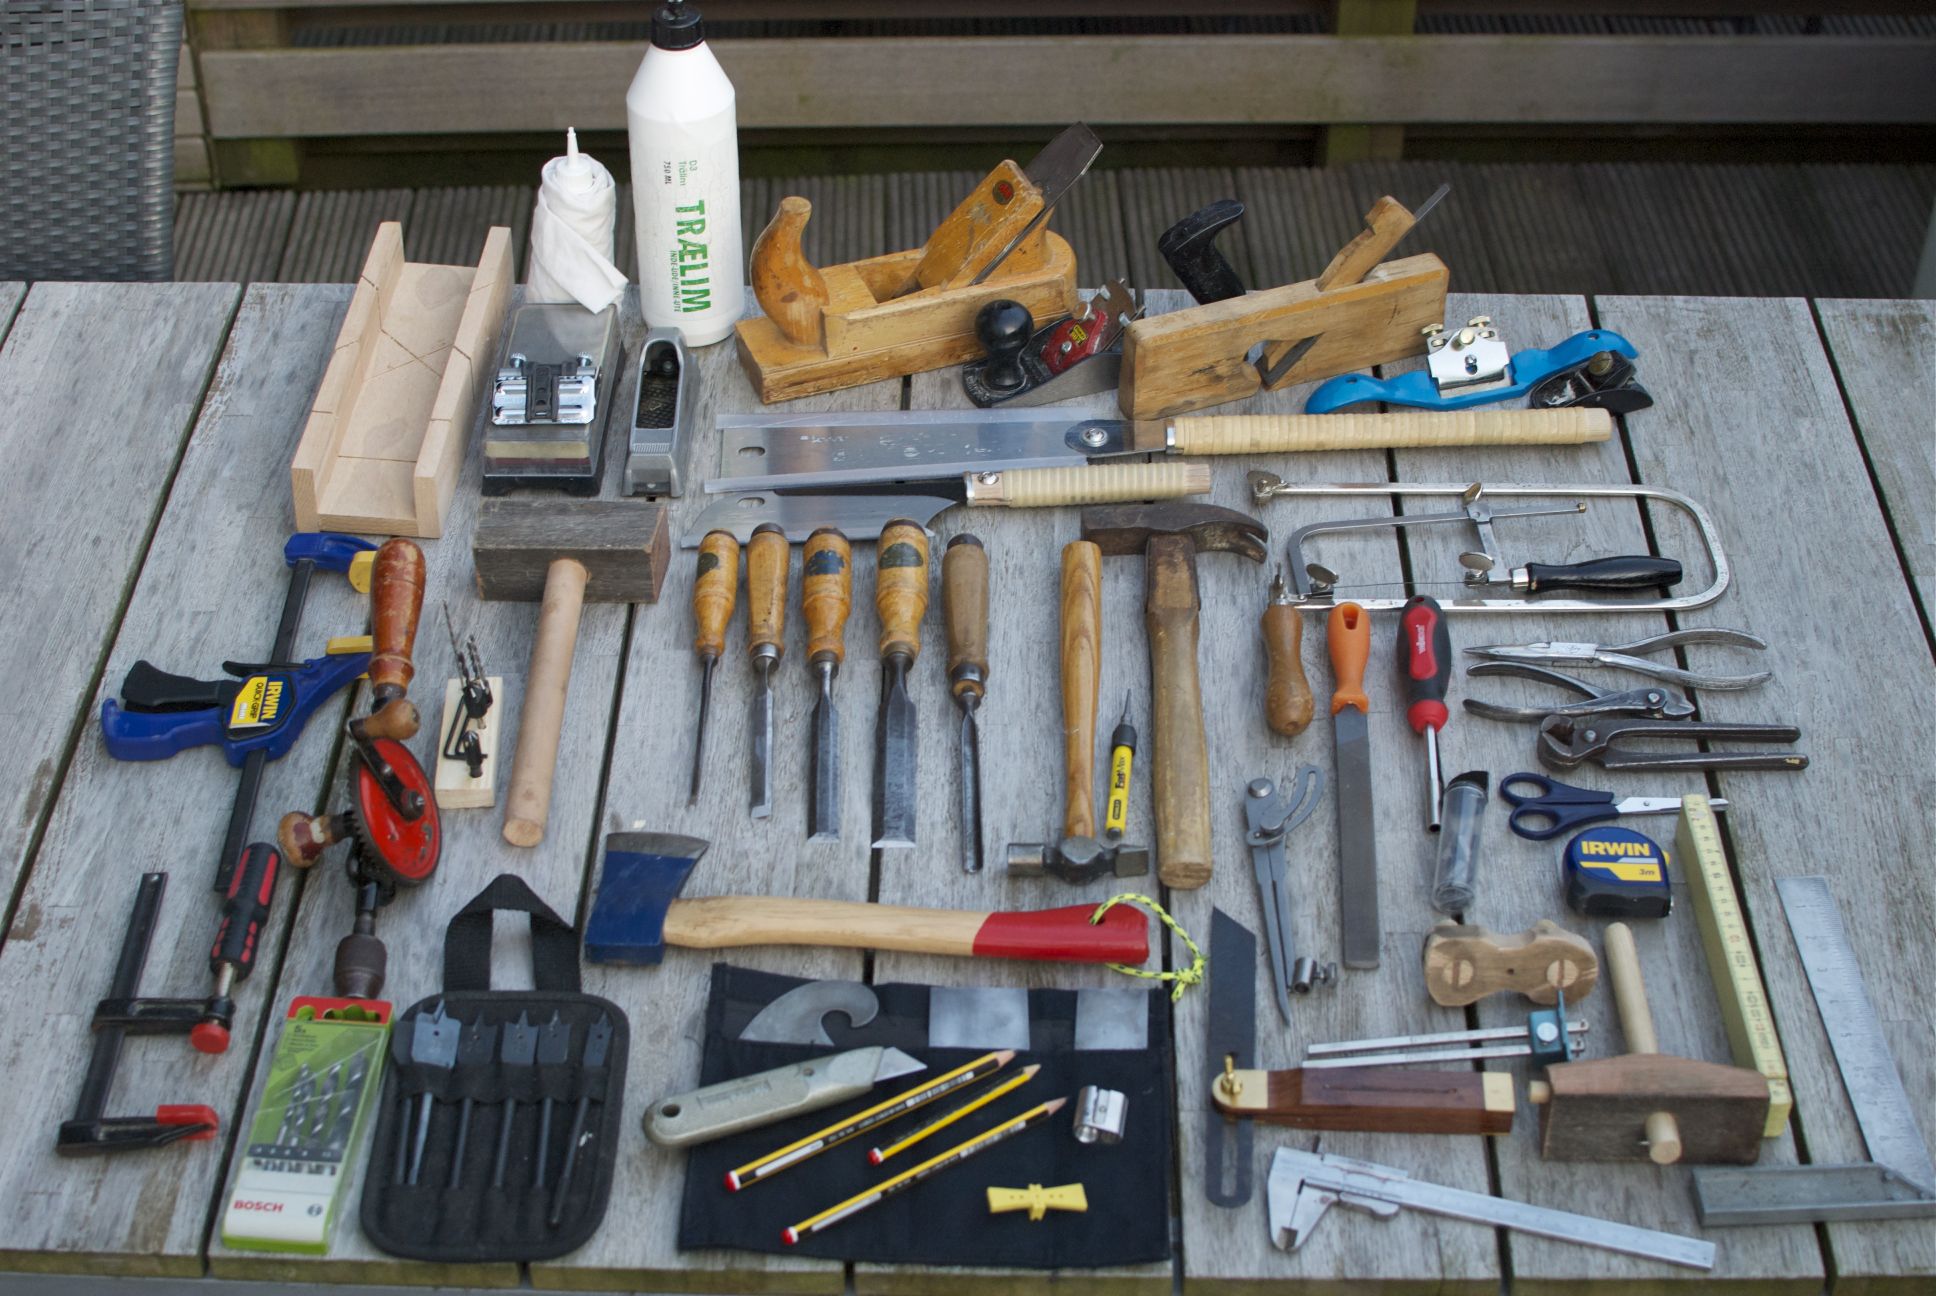 All the tools